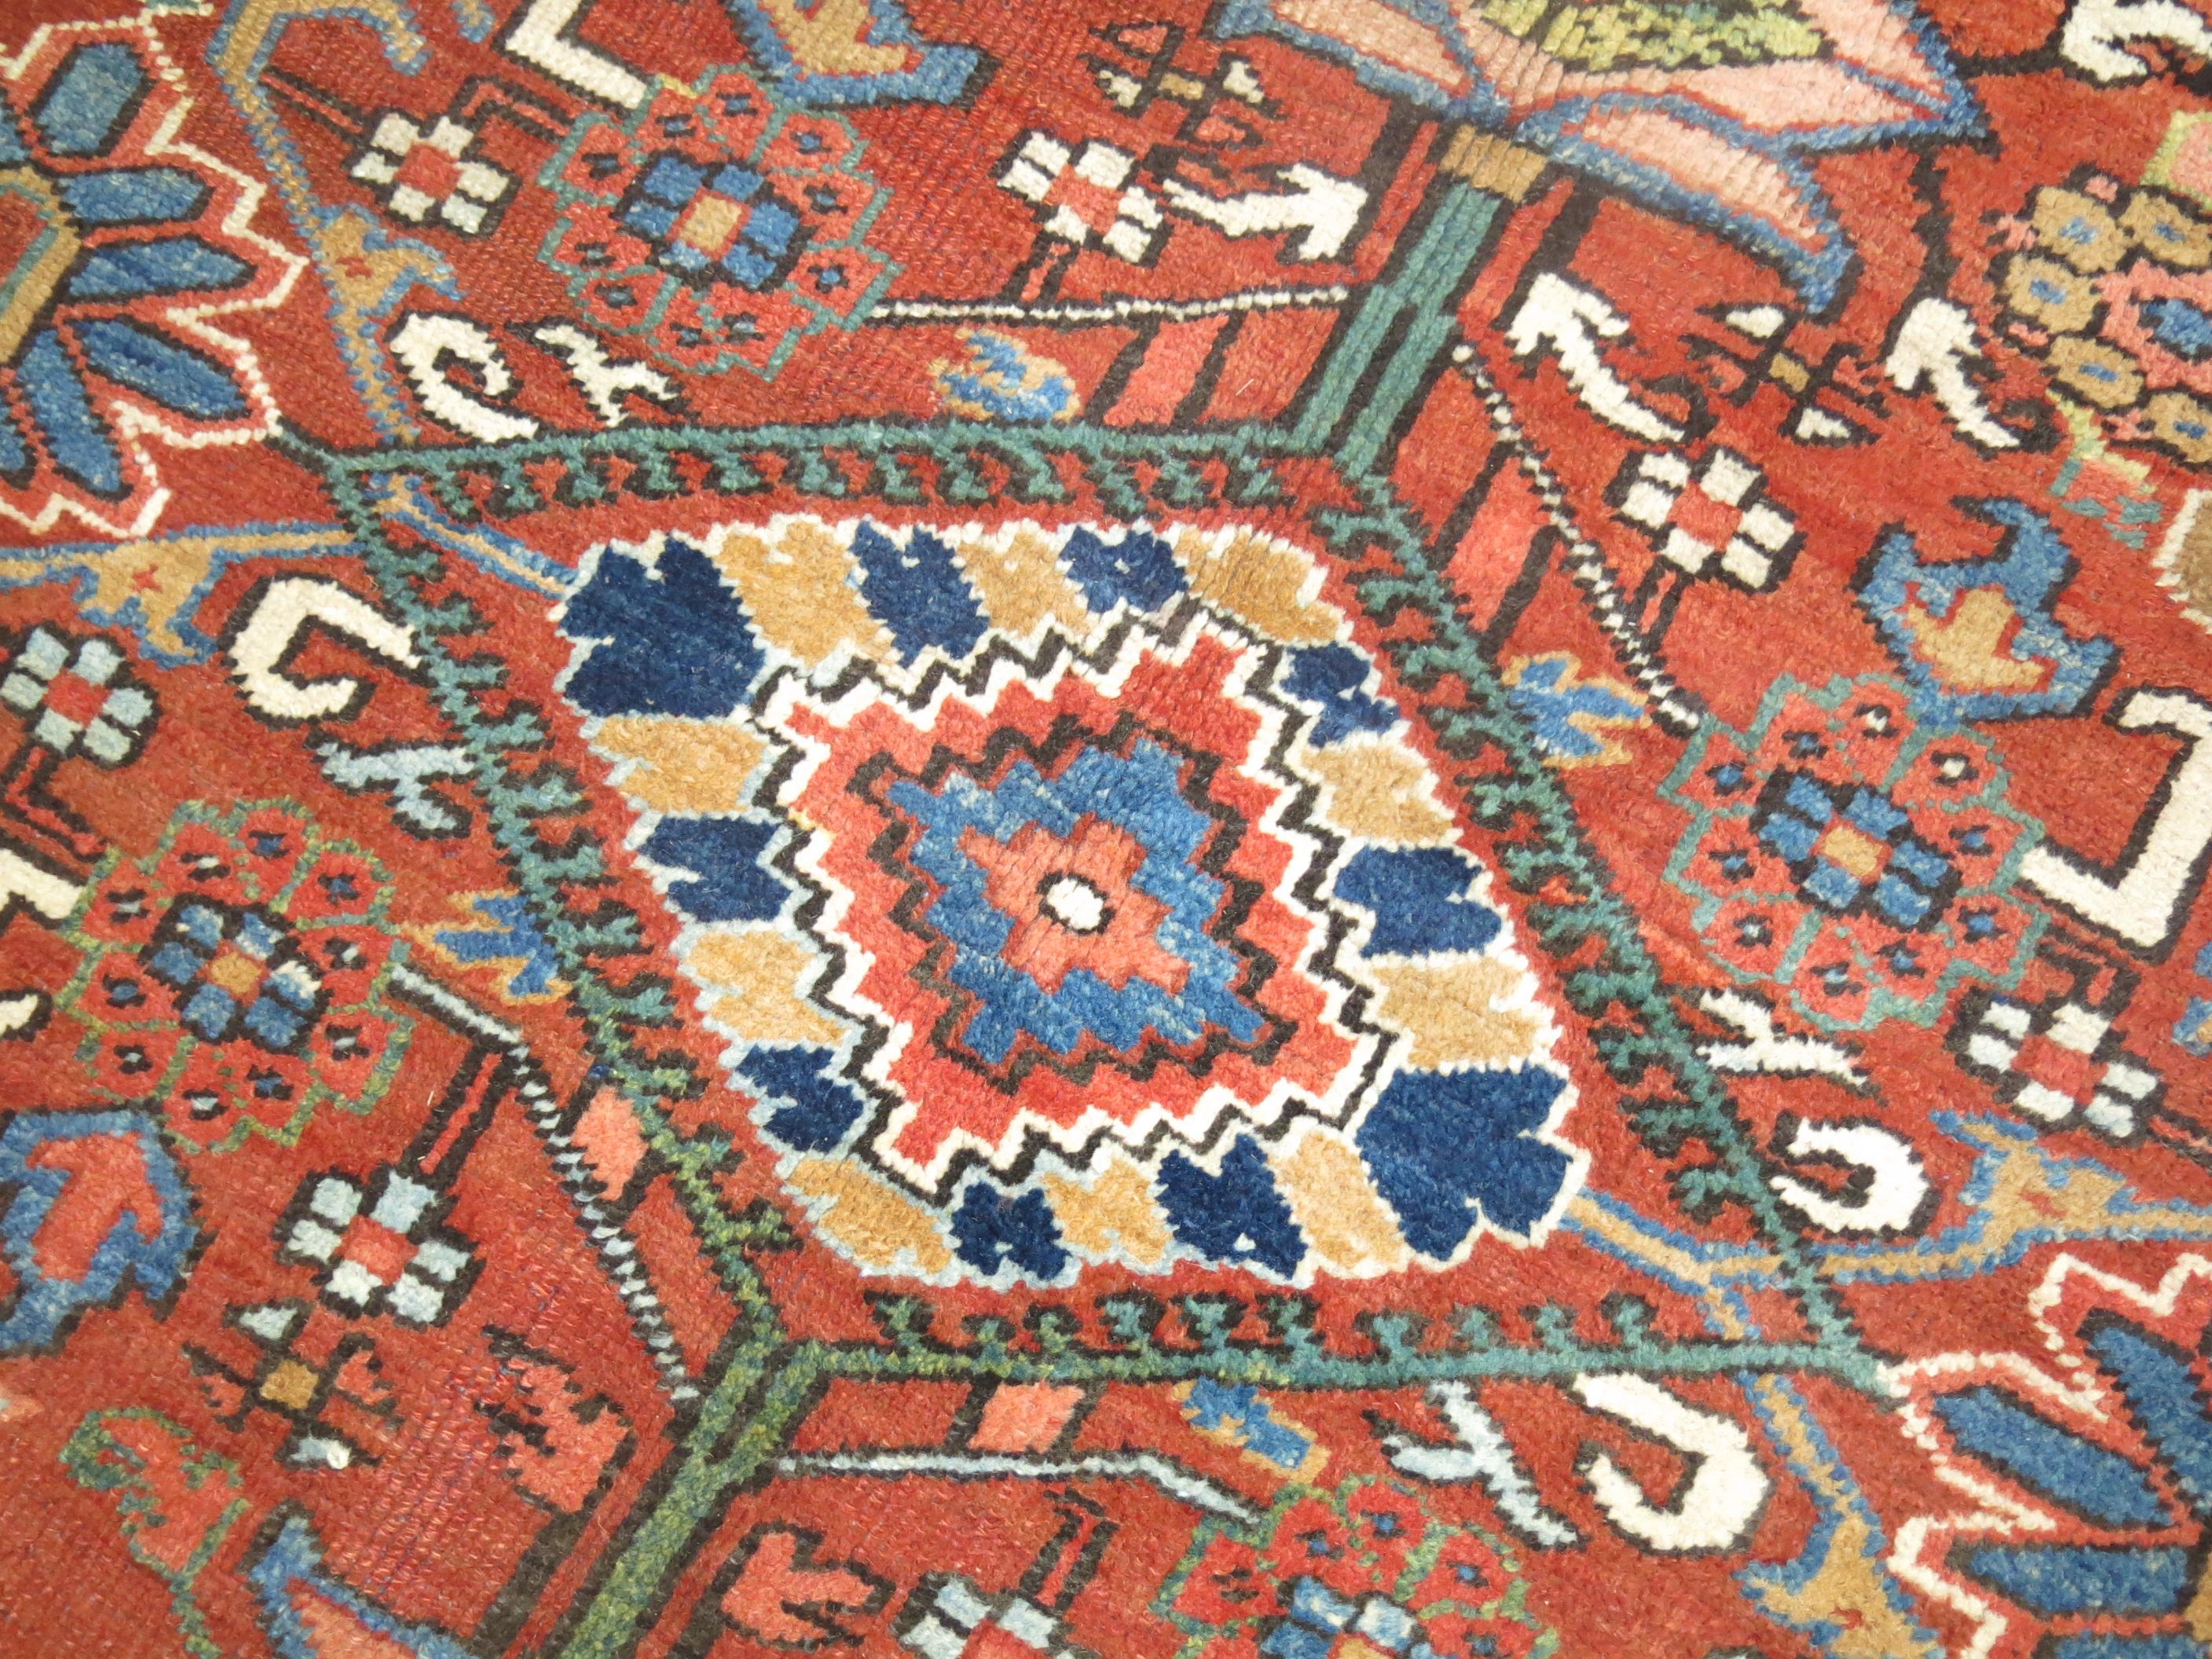 A room size Persian karadja weave heriz rug . Orangy-red field, navy border. Accents in light green, sky blue. Compelling all-over design.

8'11'' x 10'8''

Heriz carpets are beloved for their versatility. Their geometry complements modern